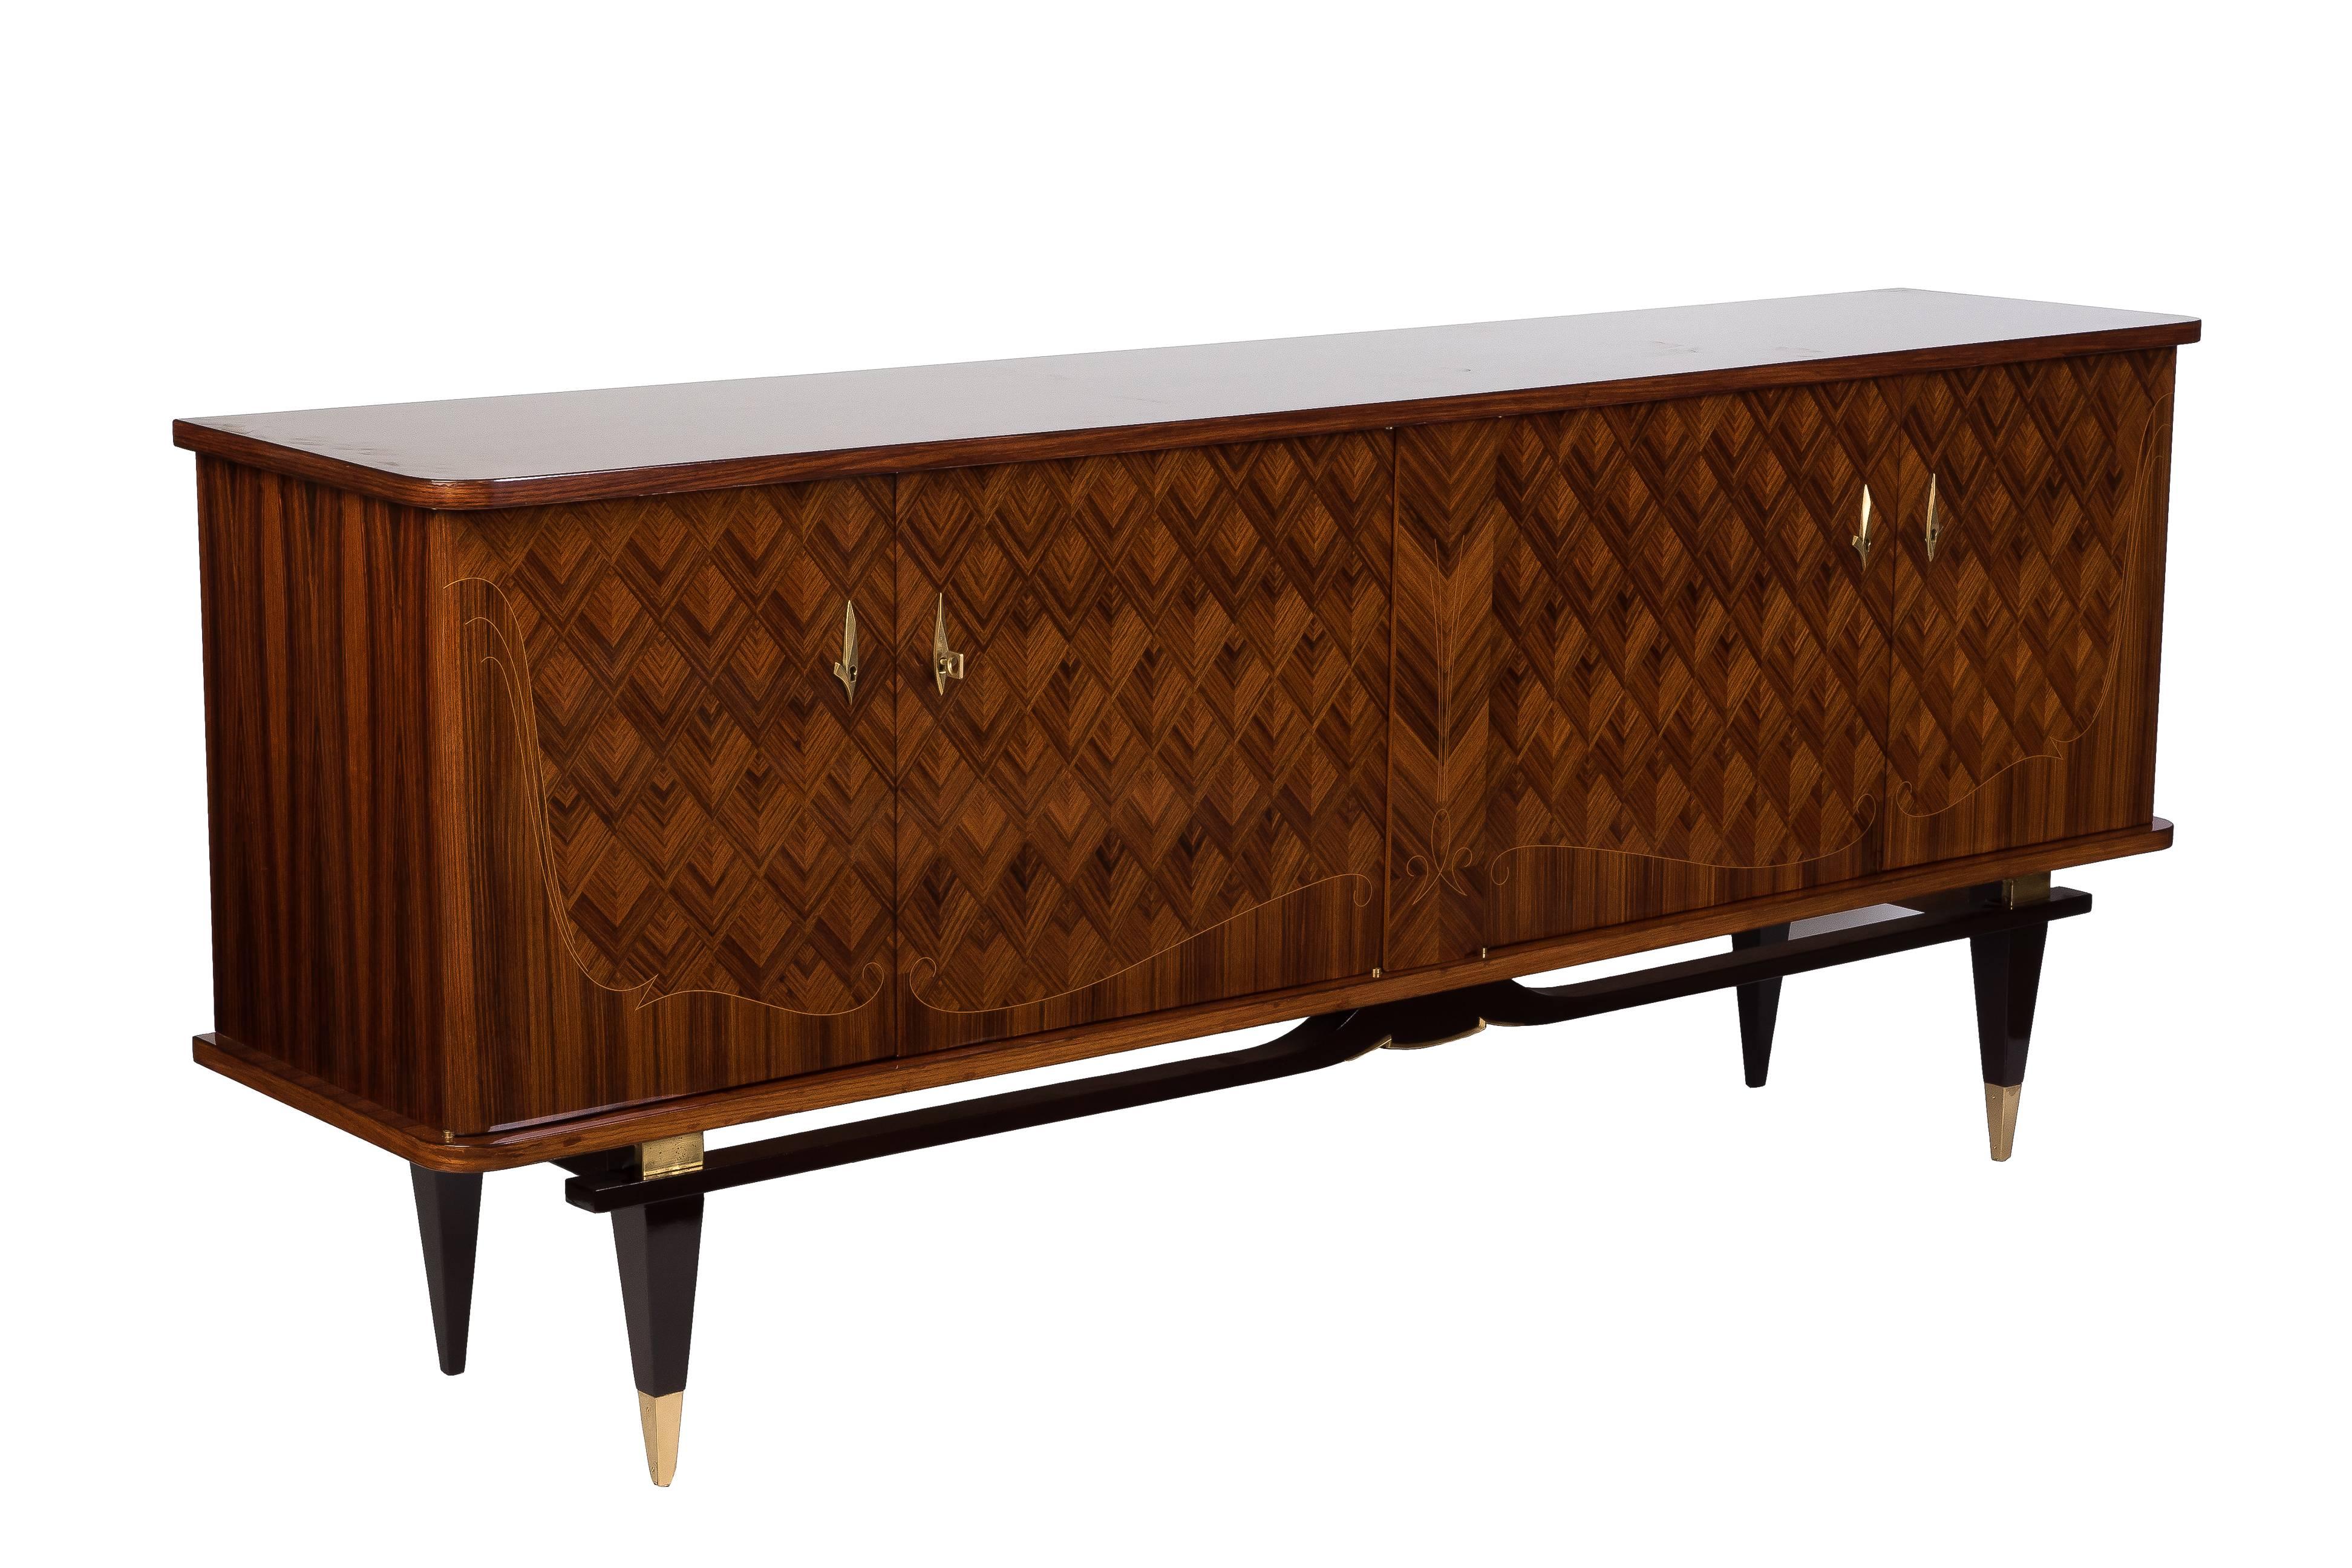 Luxe French Art Deco buffet or sideboard in solid mahogany veneered in exotic Rio palisander marquetry with stained mahogany leg. Hardware in brass. Finished interior in sycamore.

Made in France, circa 1935.